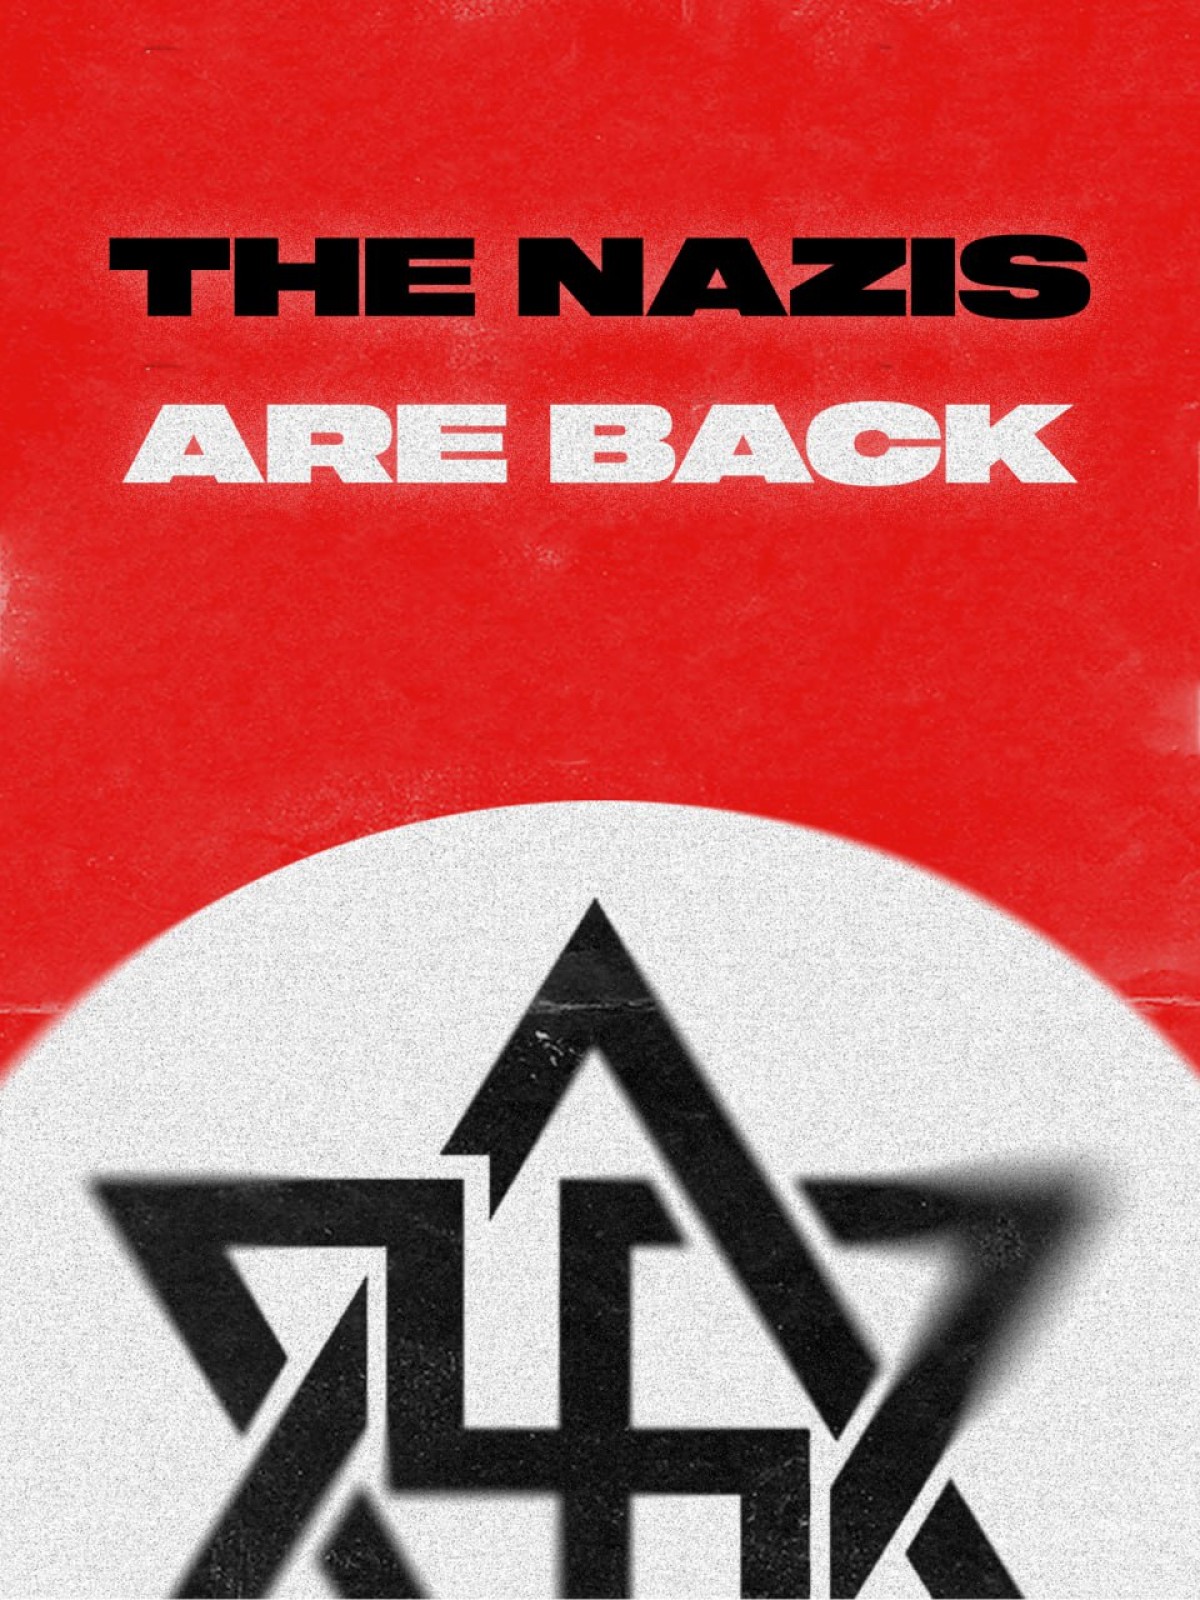 THE NAZIS ARE BACK